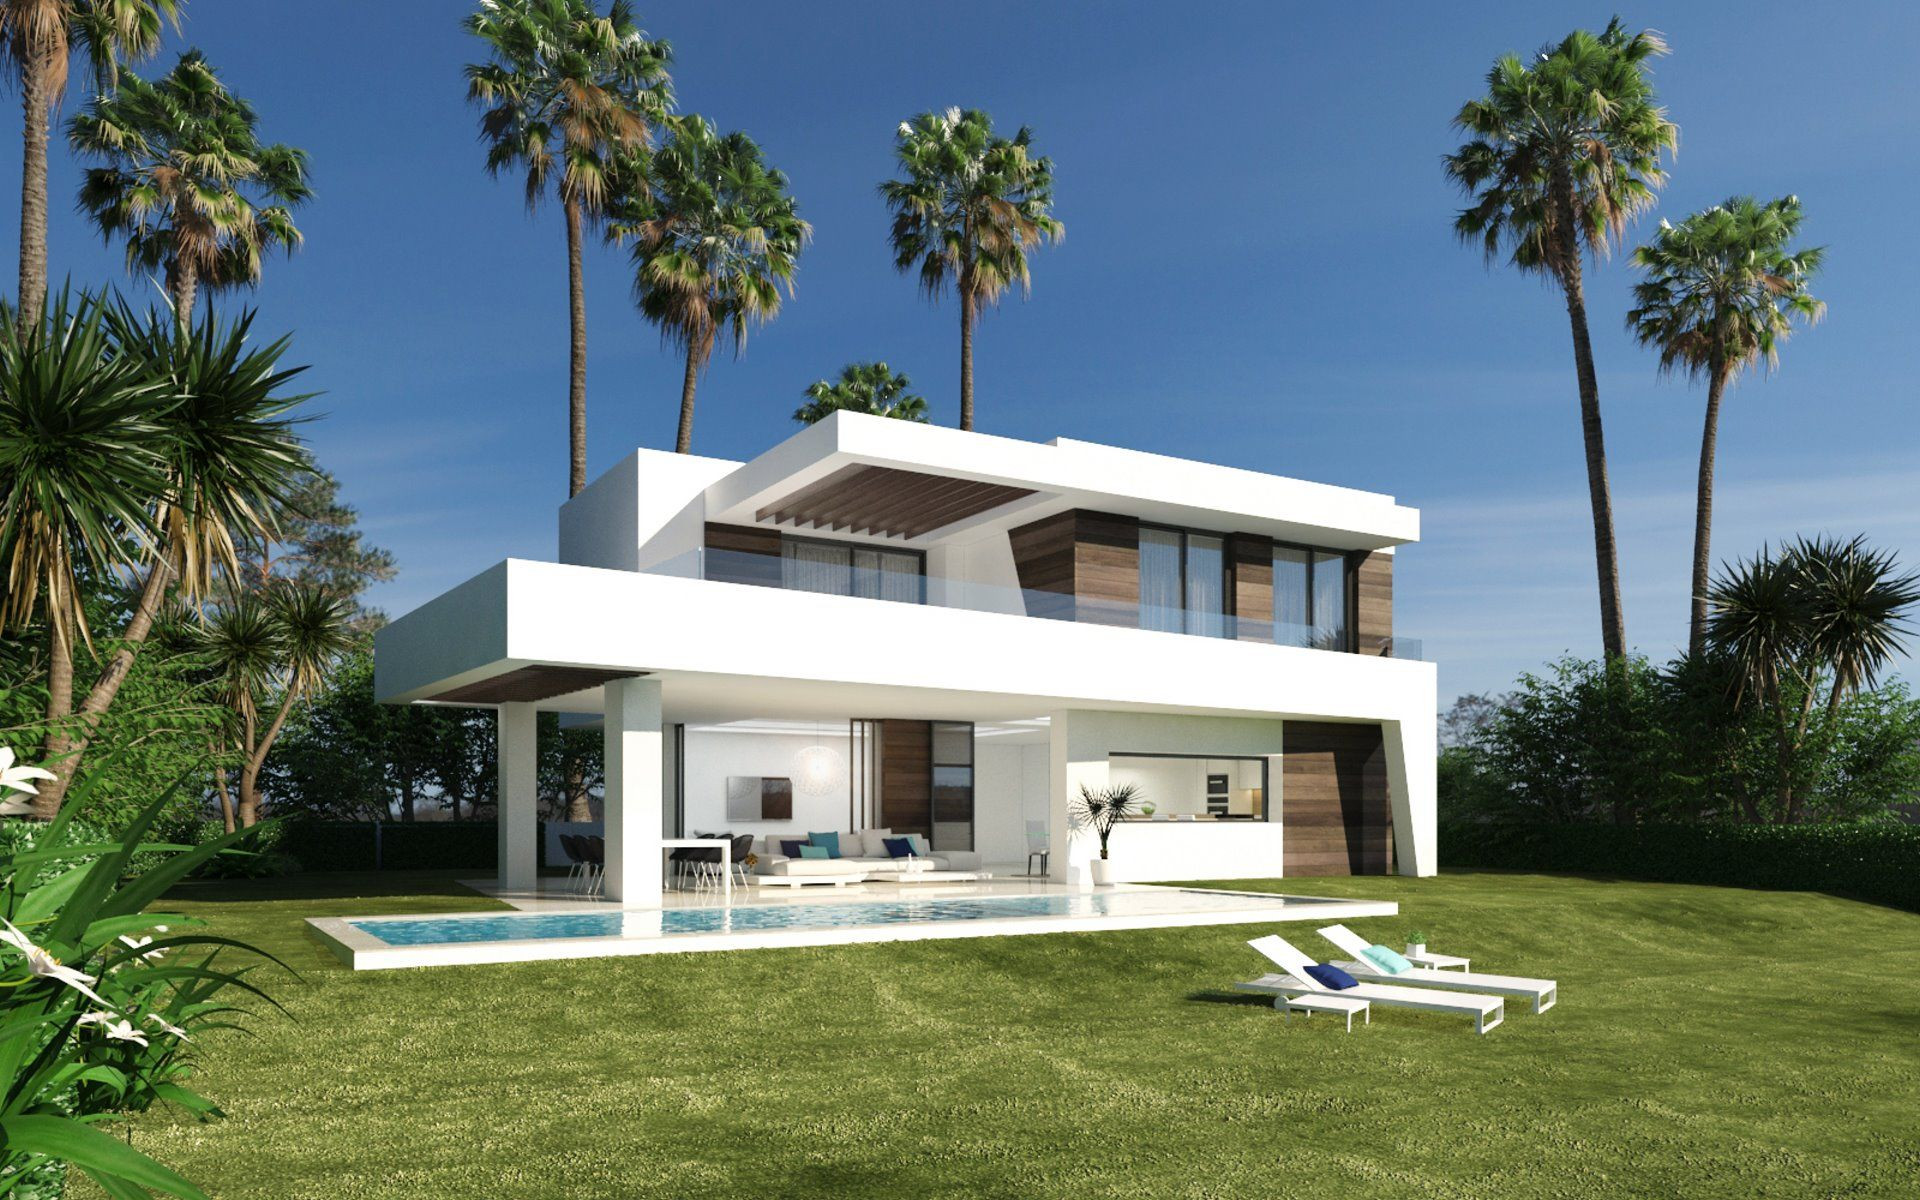 New front line golf complex of contemporary villas for sale on the New Golden Mile Estepona